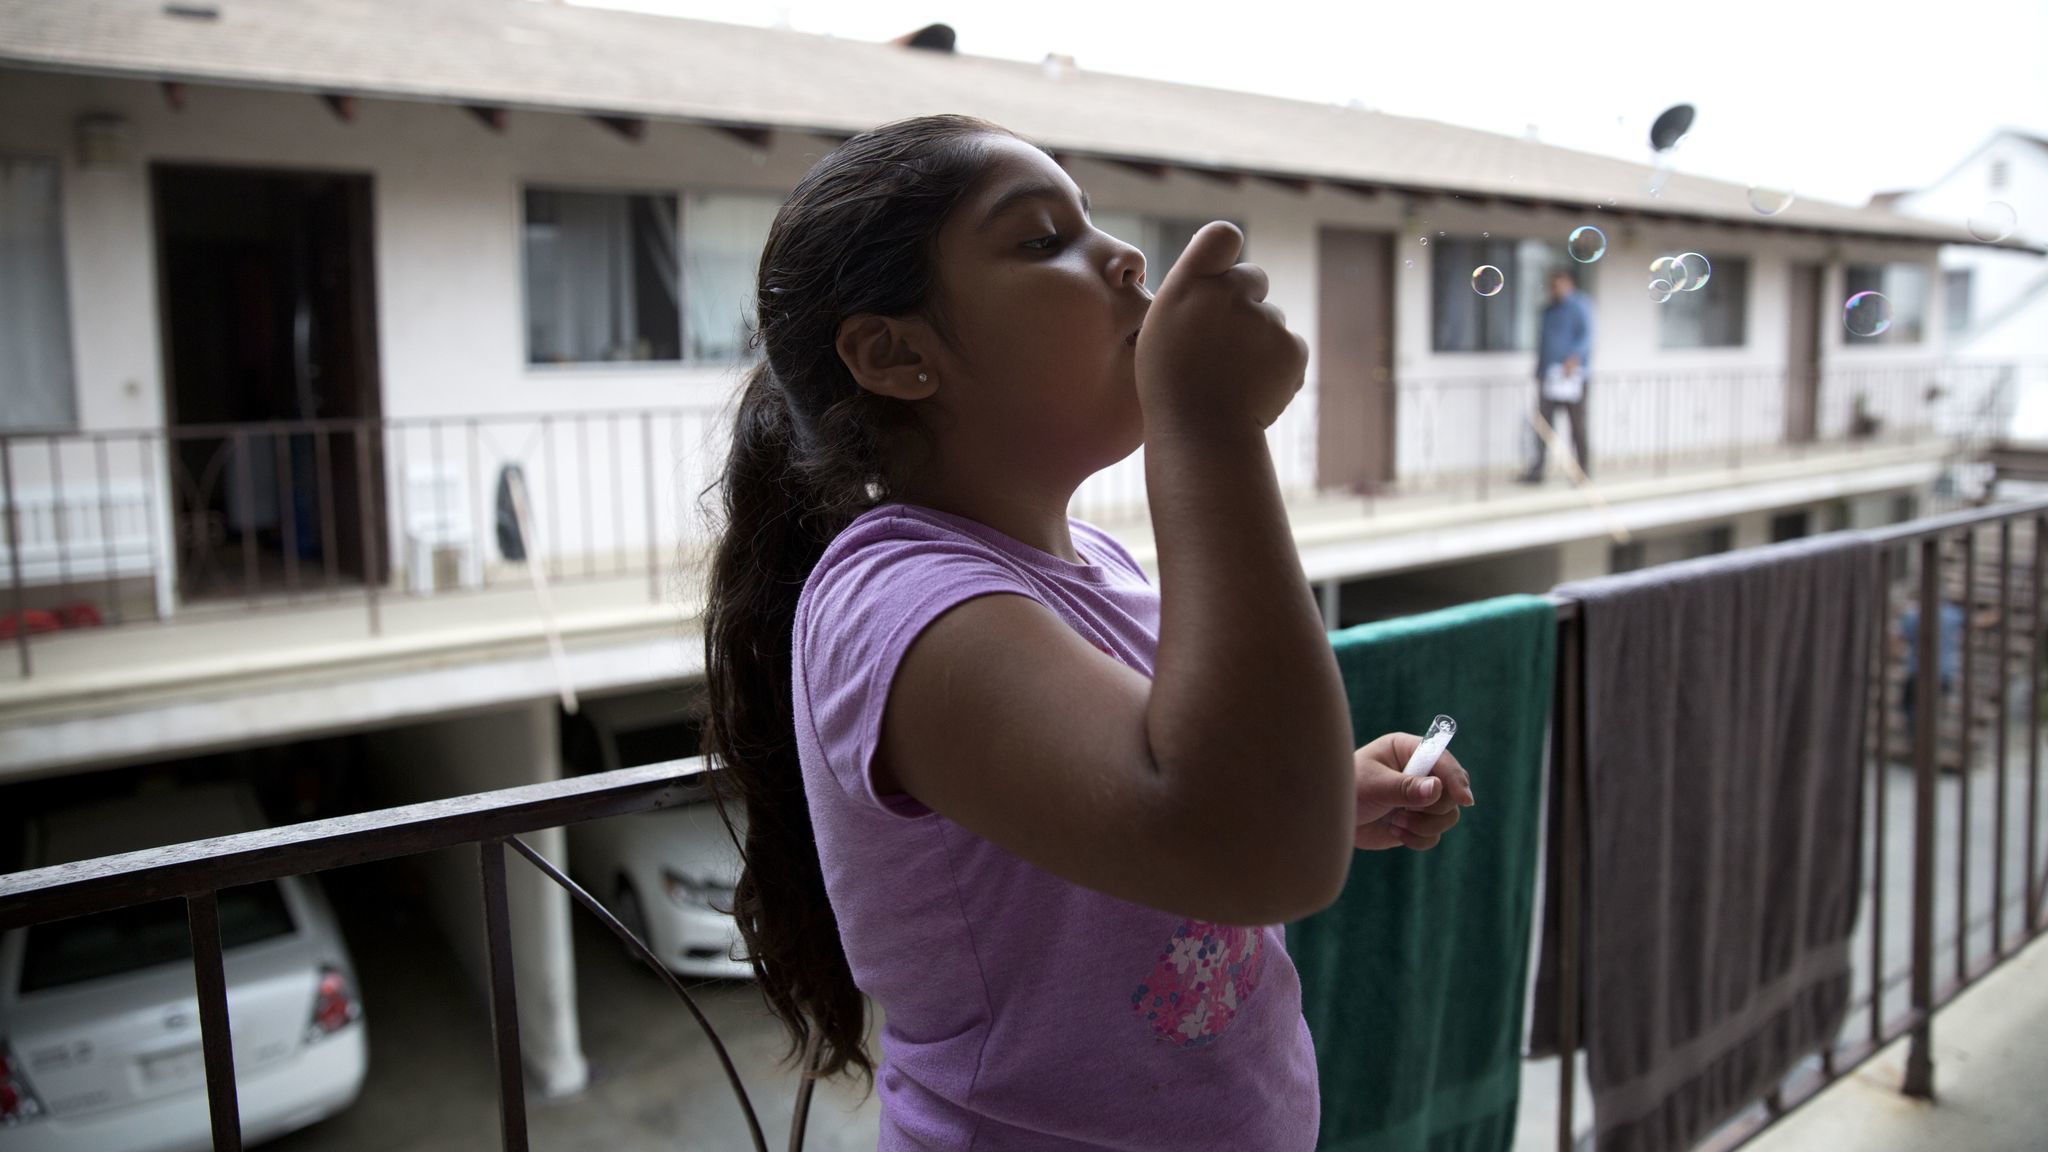 As her family packs the car to move, Luz Madrigal, 6, blows bubbles on the balcony of her apartment in Gardena.